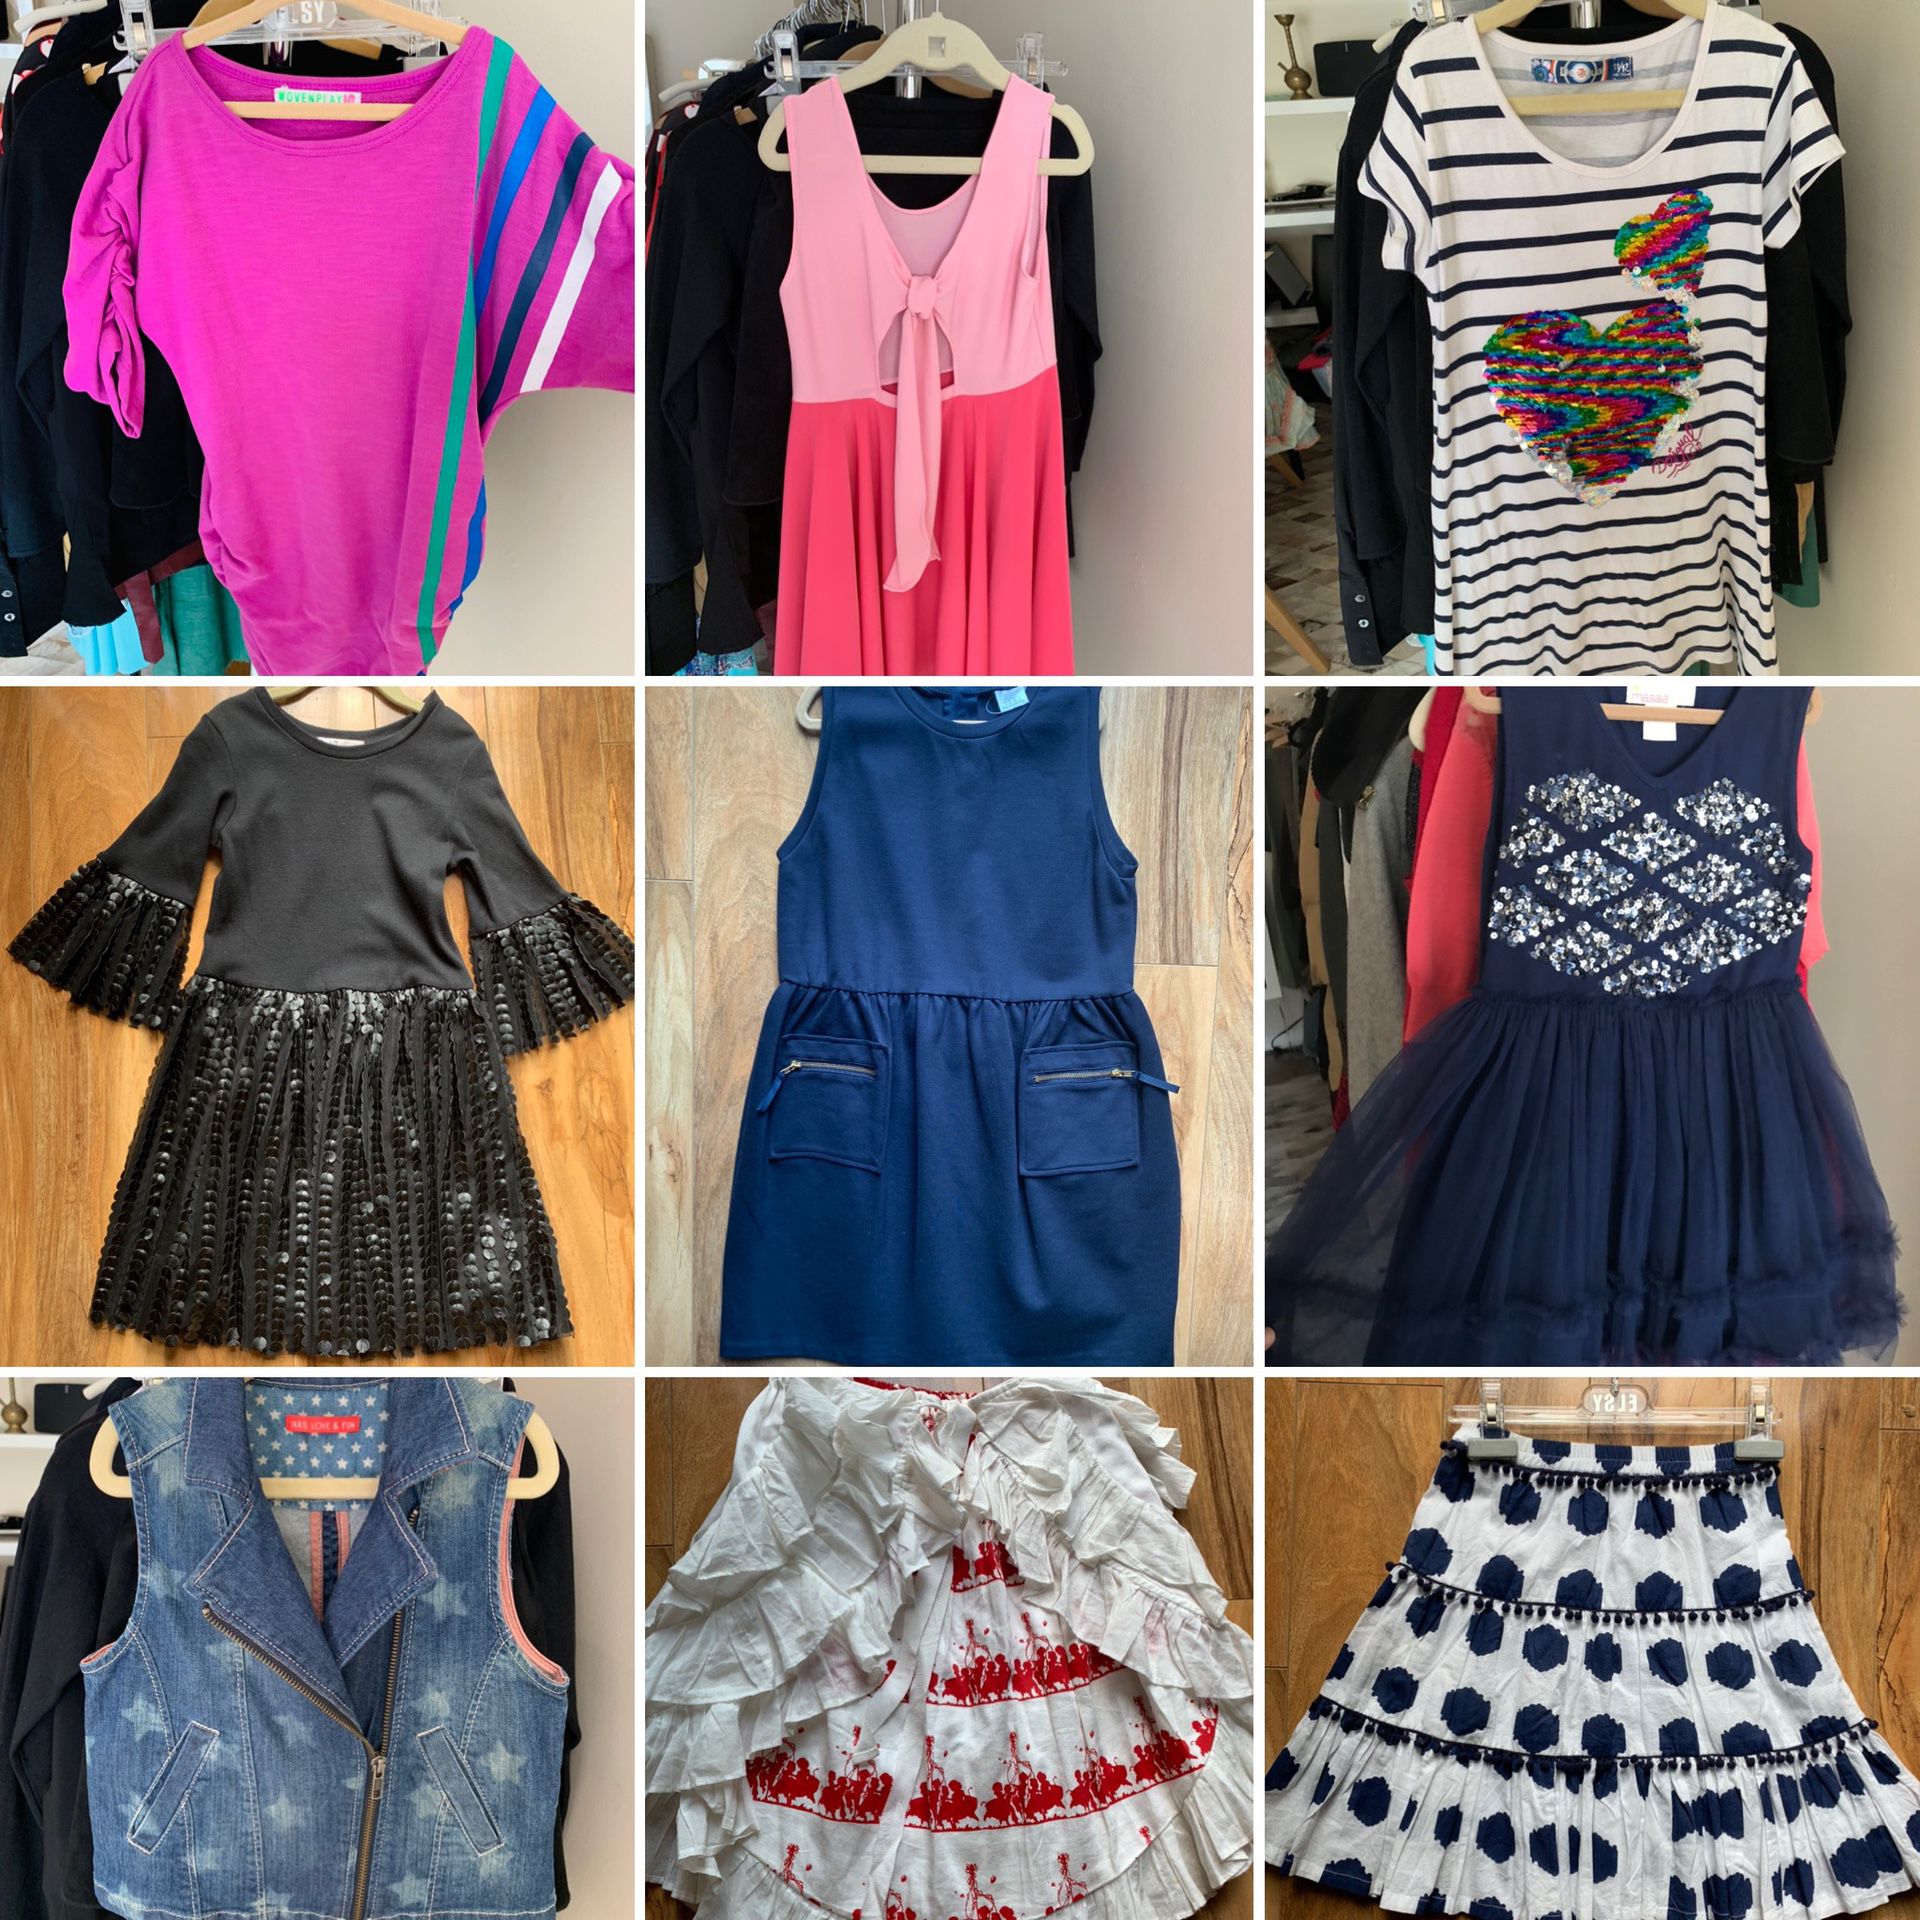 Girls designer name brand clothes size 6/7/8 dresses shirts leggings jeans sweaters